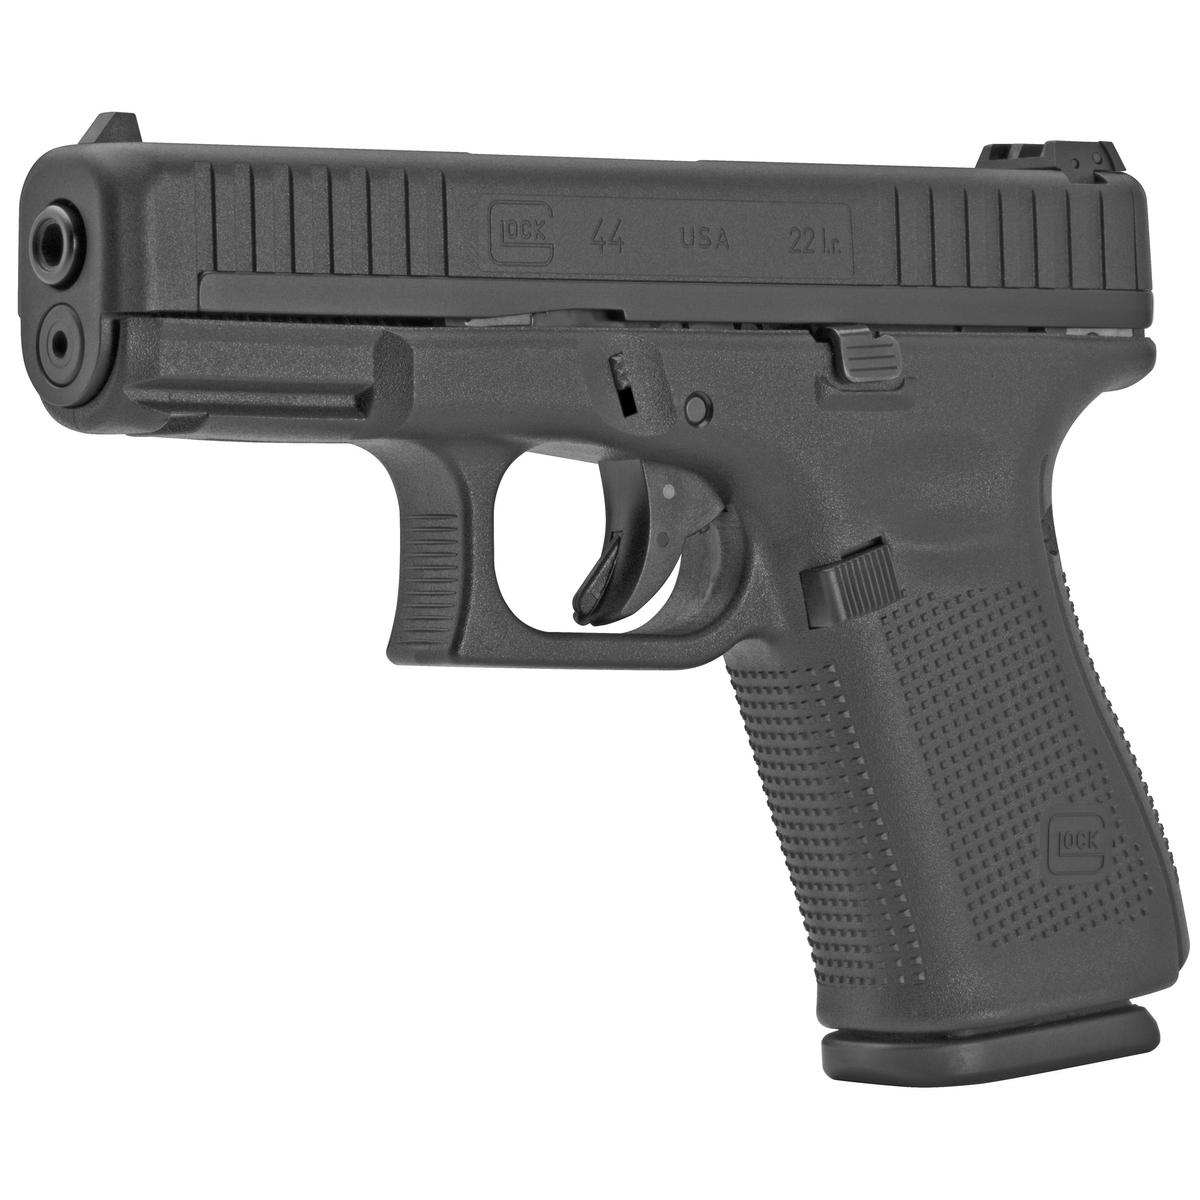 NEW IN BOX: Glock, 44, Striker Fired, Compact, 22LR, 4" Barrel, Polymer, Adjust Sights,10Rd, 2 Mags